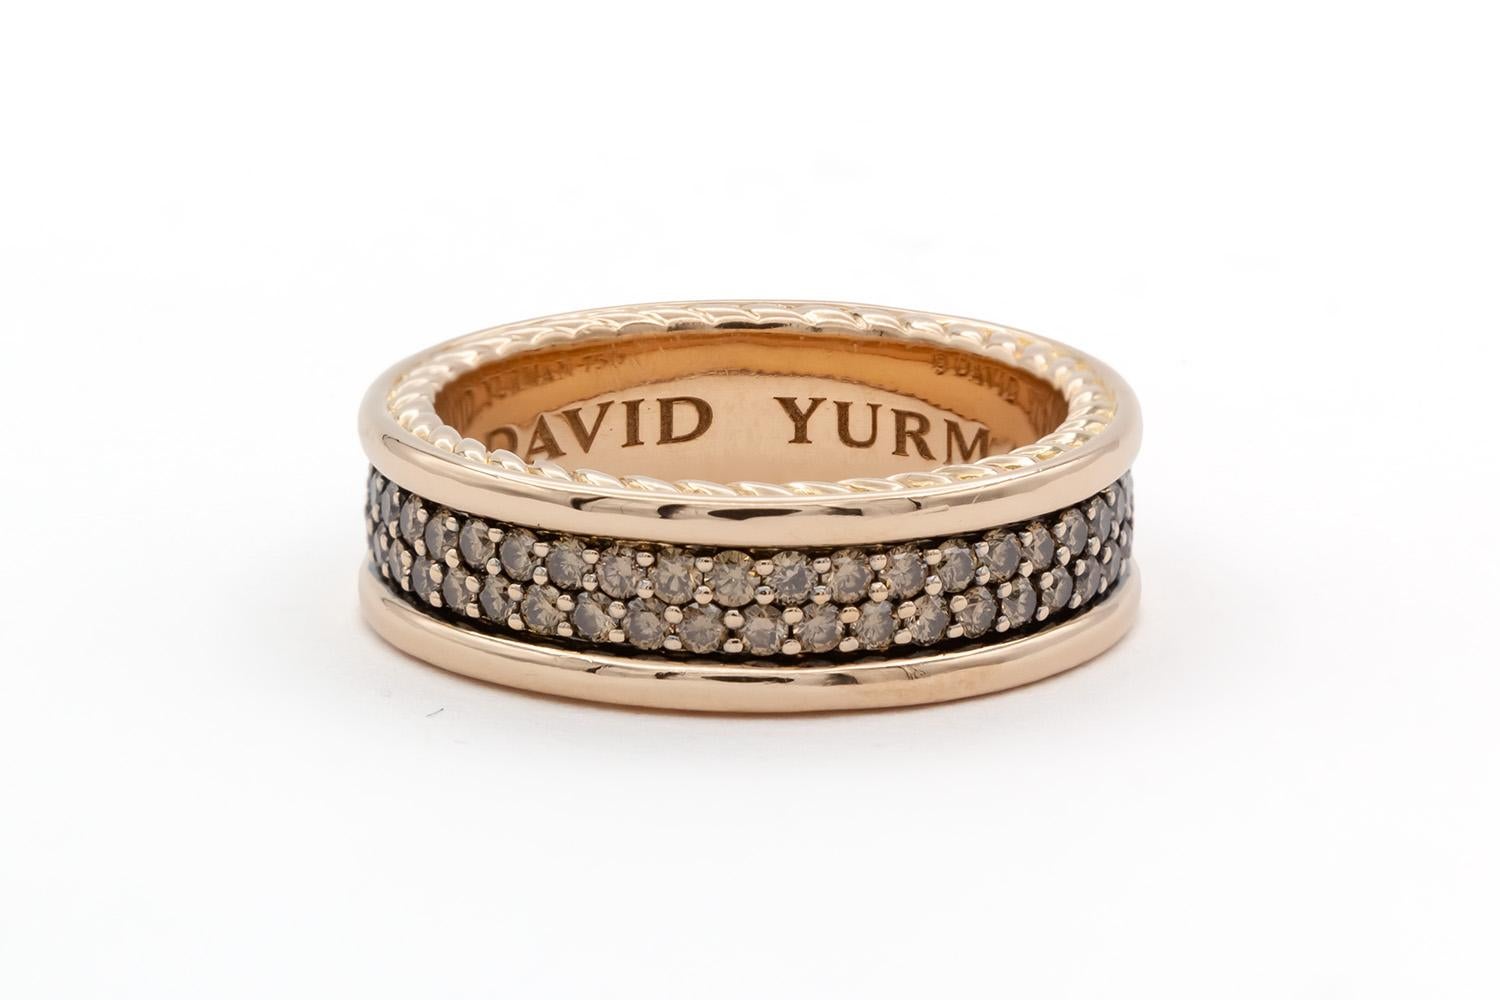 We are pleased to offer this David Yurman Streamline 2 Row Mens Band Ring. Featuring David Yurmans classic cable design this ring is fashioned from 18k rose gold and set with 1.37ctw round brilliant cut cognac diamonds. The ring measures 6.5mm wide